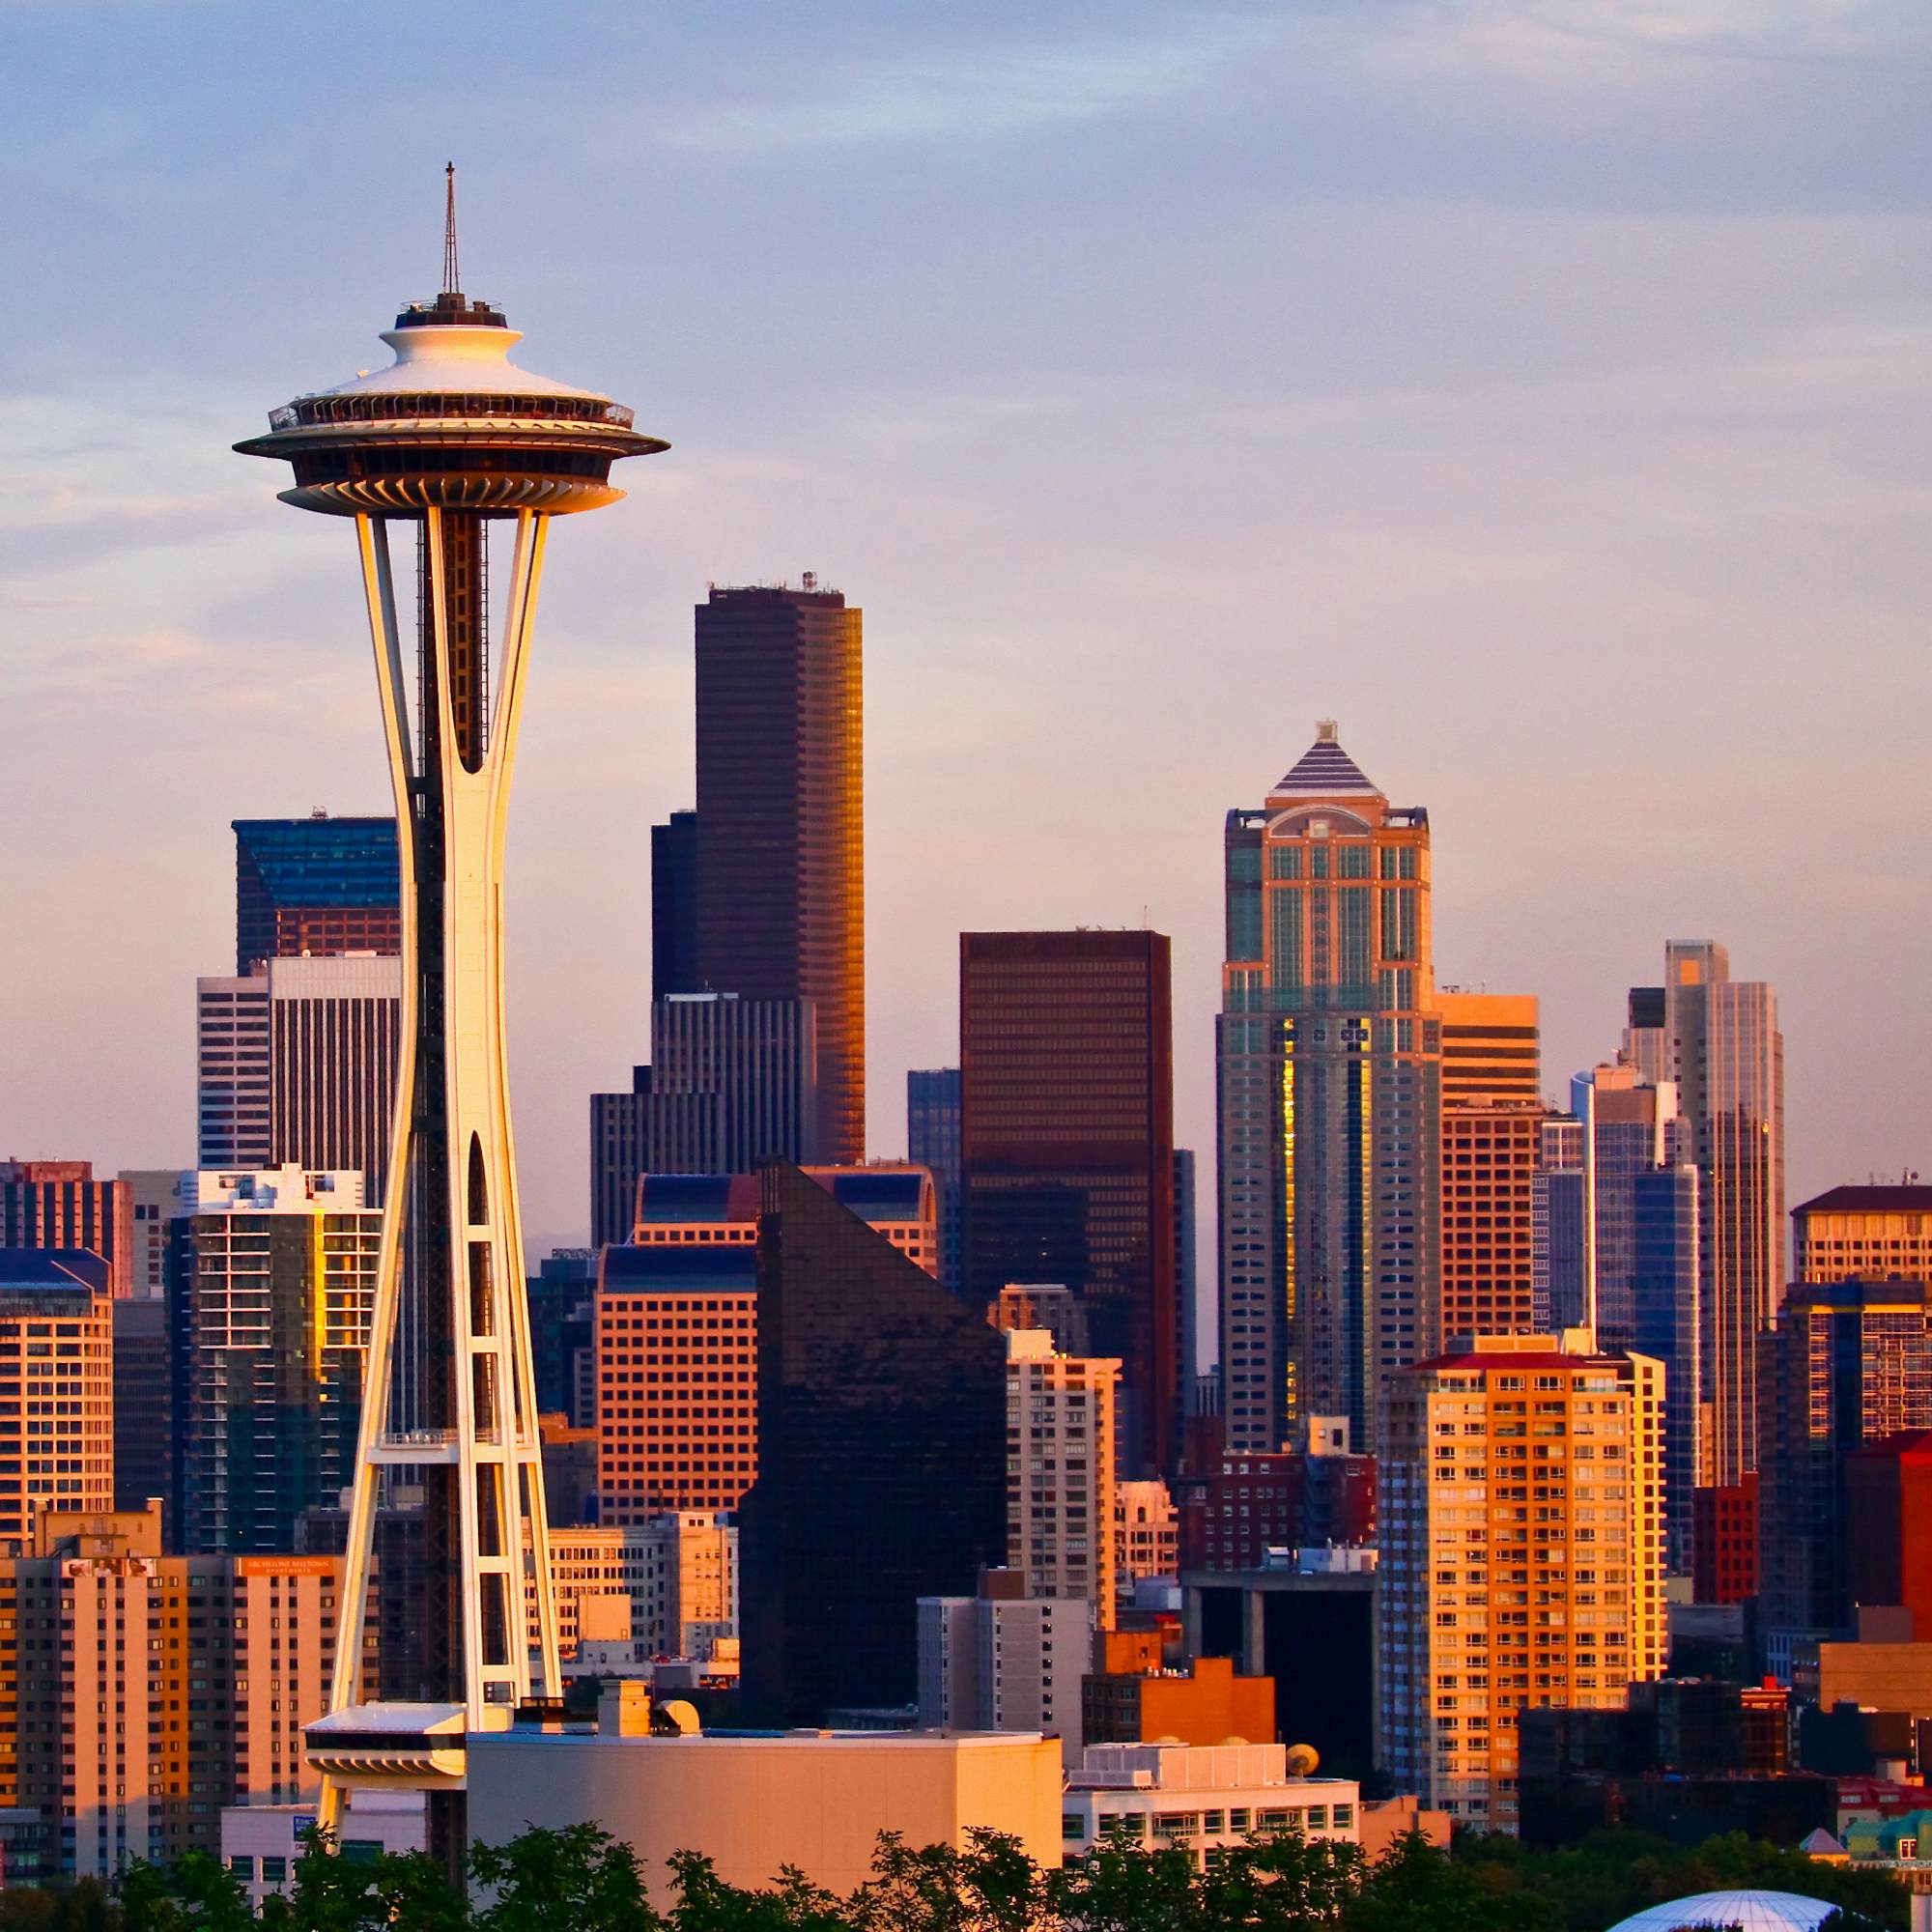 https://lp-cms-production.imgix.net/2019-06/70537b86f448ead74674d37aade140ef-space-needle.jpg?q=40&w=2000&auto=format